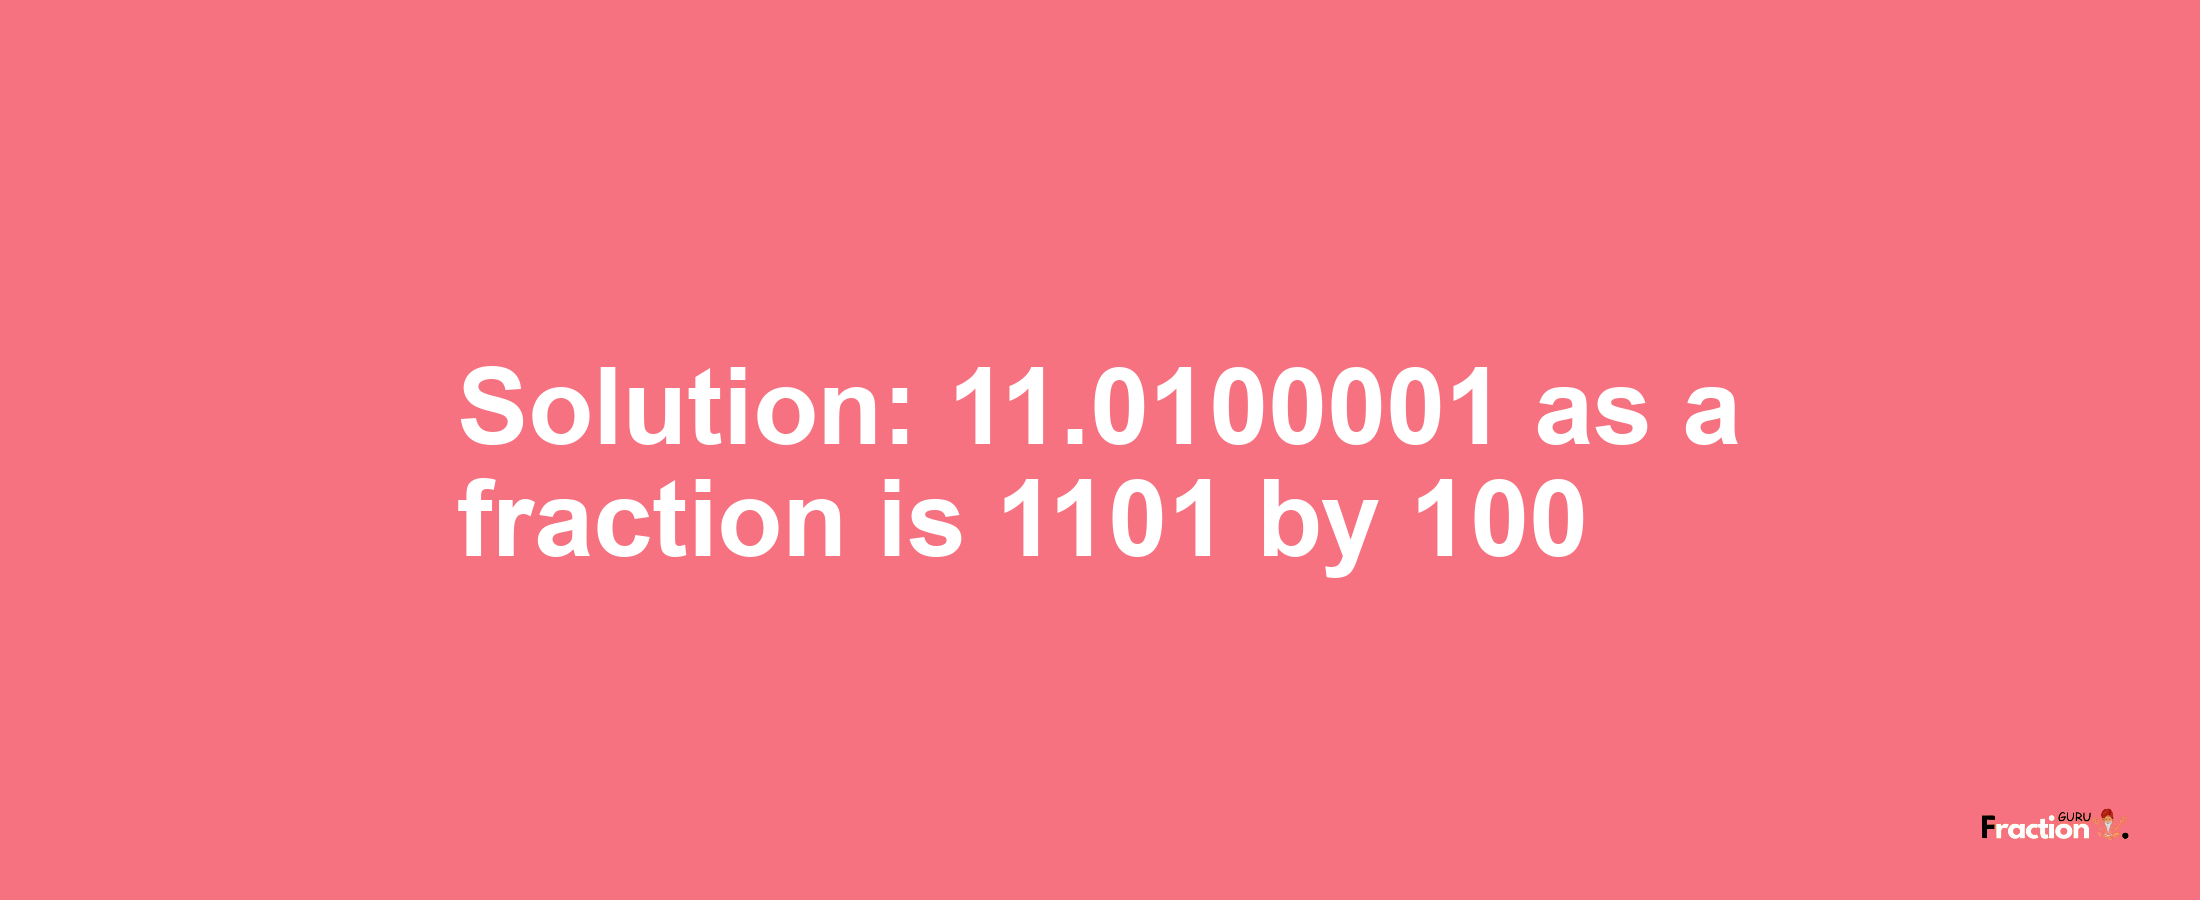 Solution:11.0100001 as a fraction is 1101/100